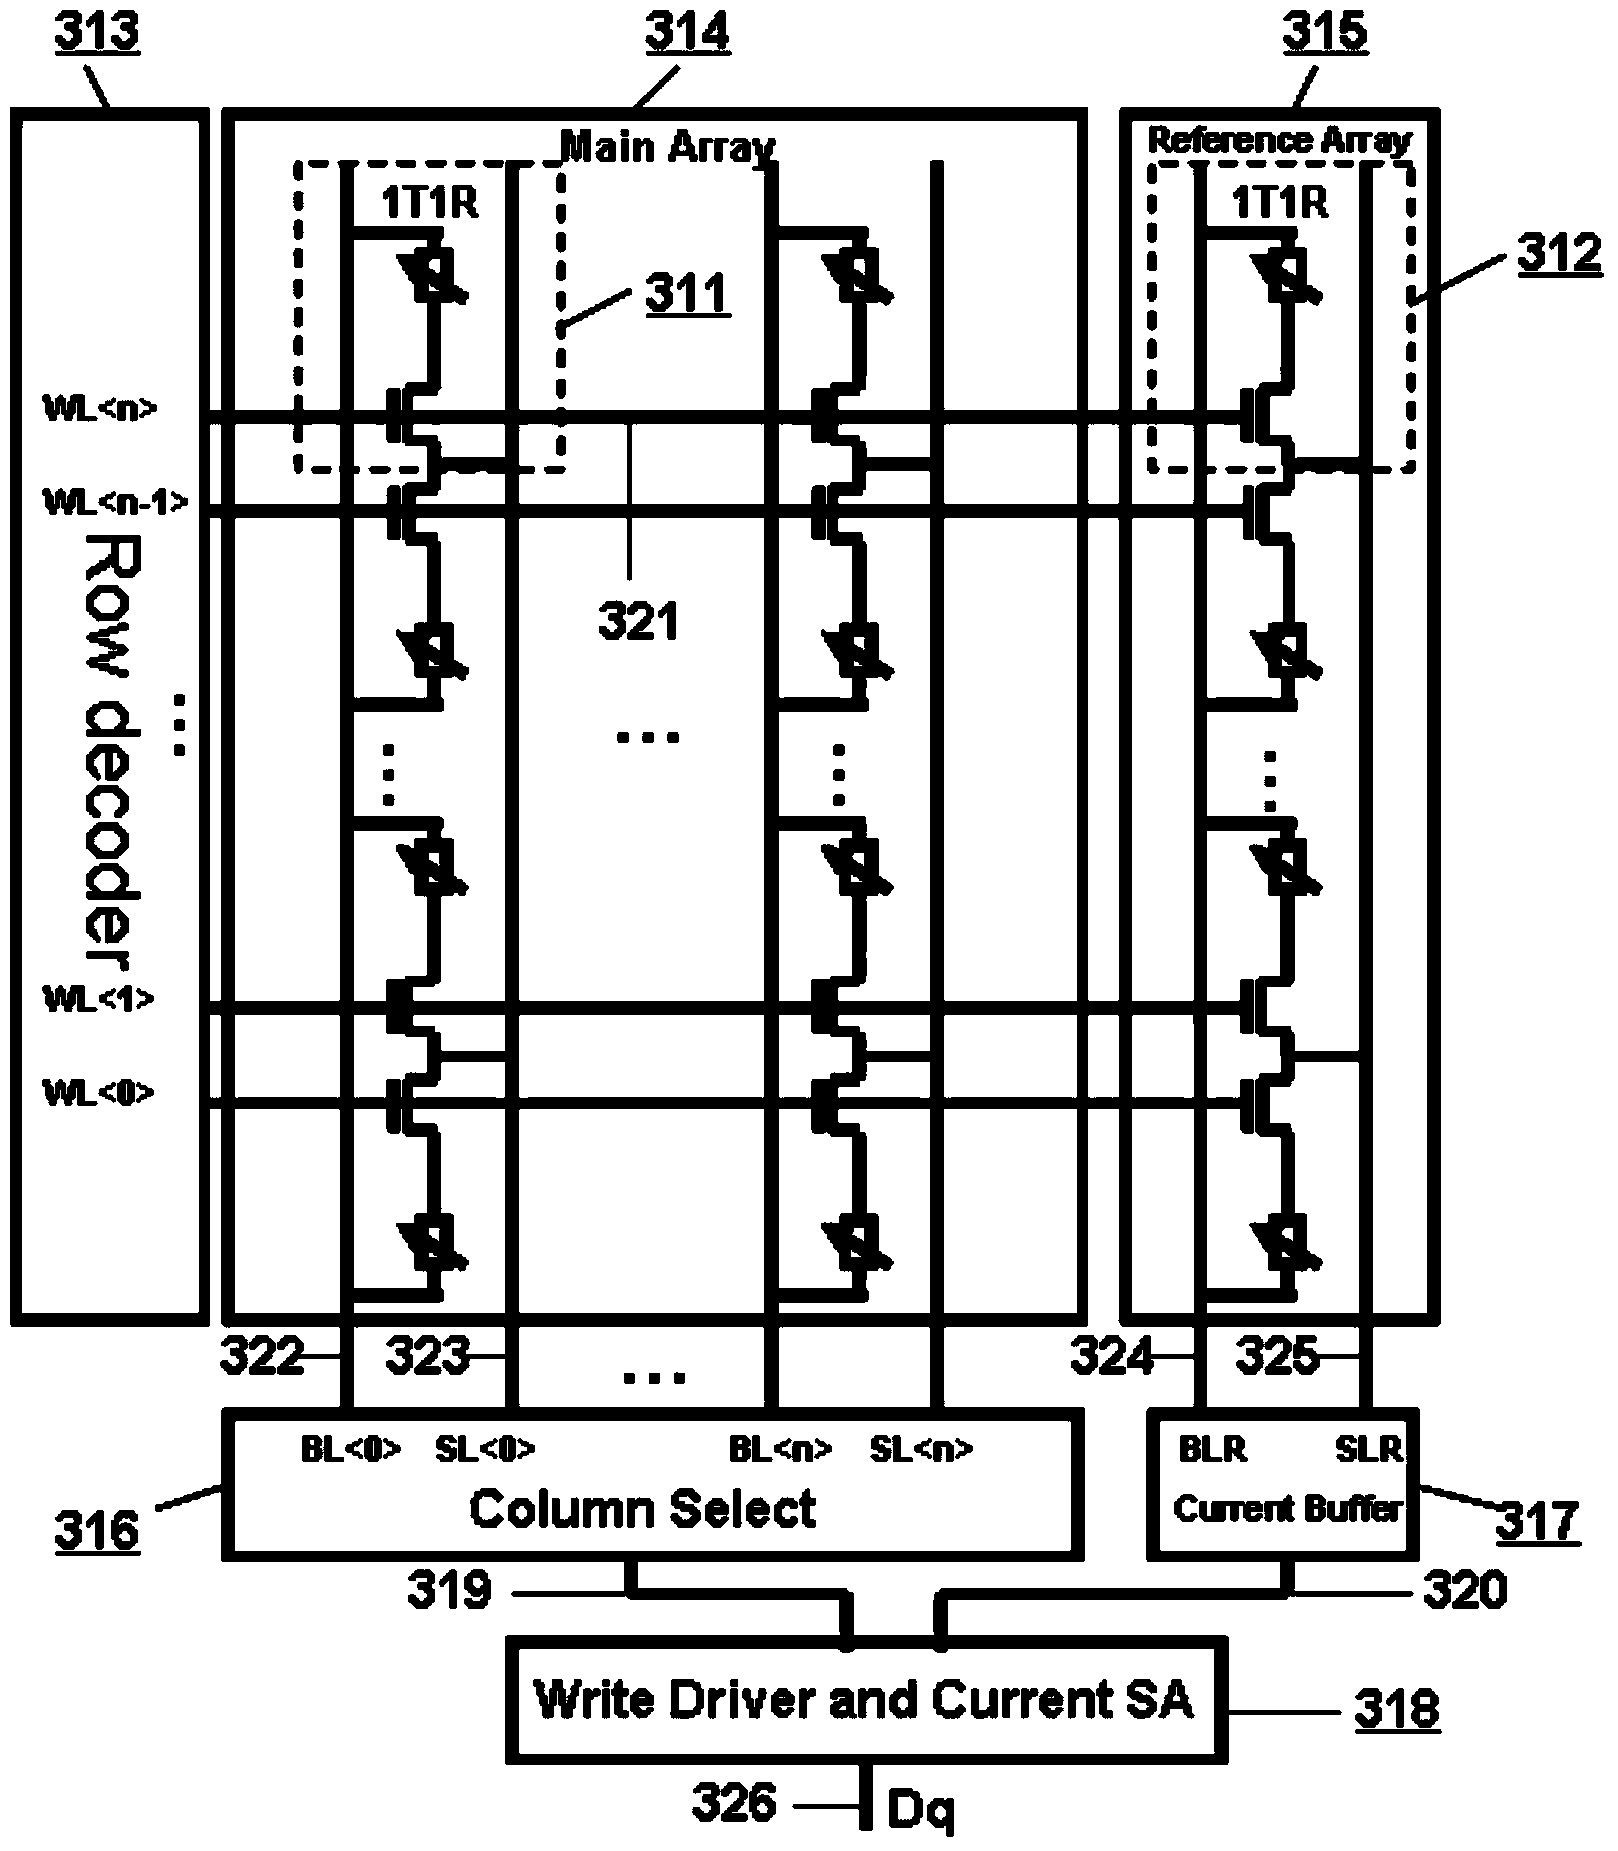 2-1T1R (2-1transistor1resistor) RRAM (resistive random access memory) unit with reading self-reference function